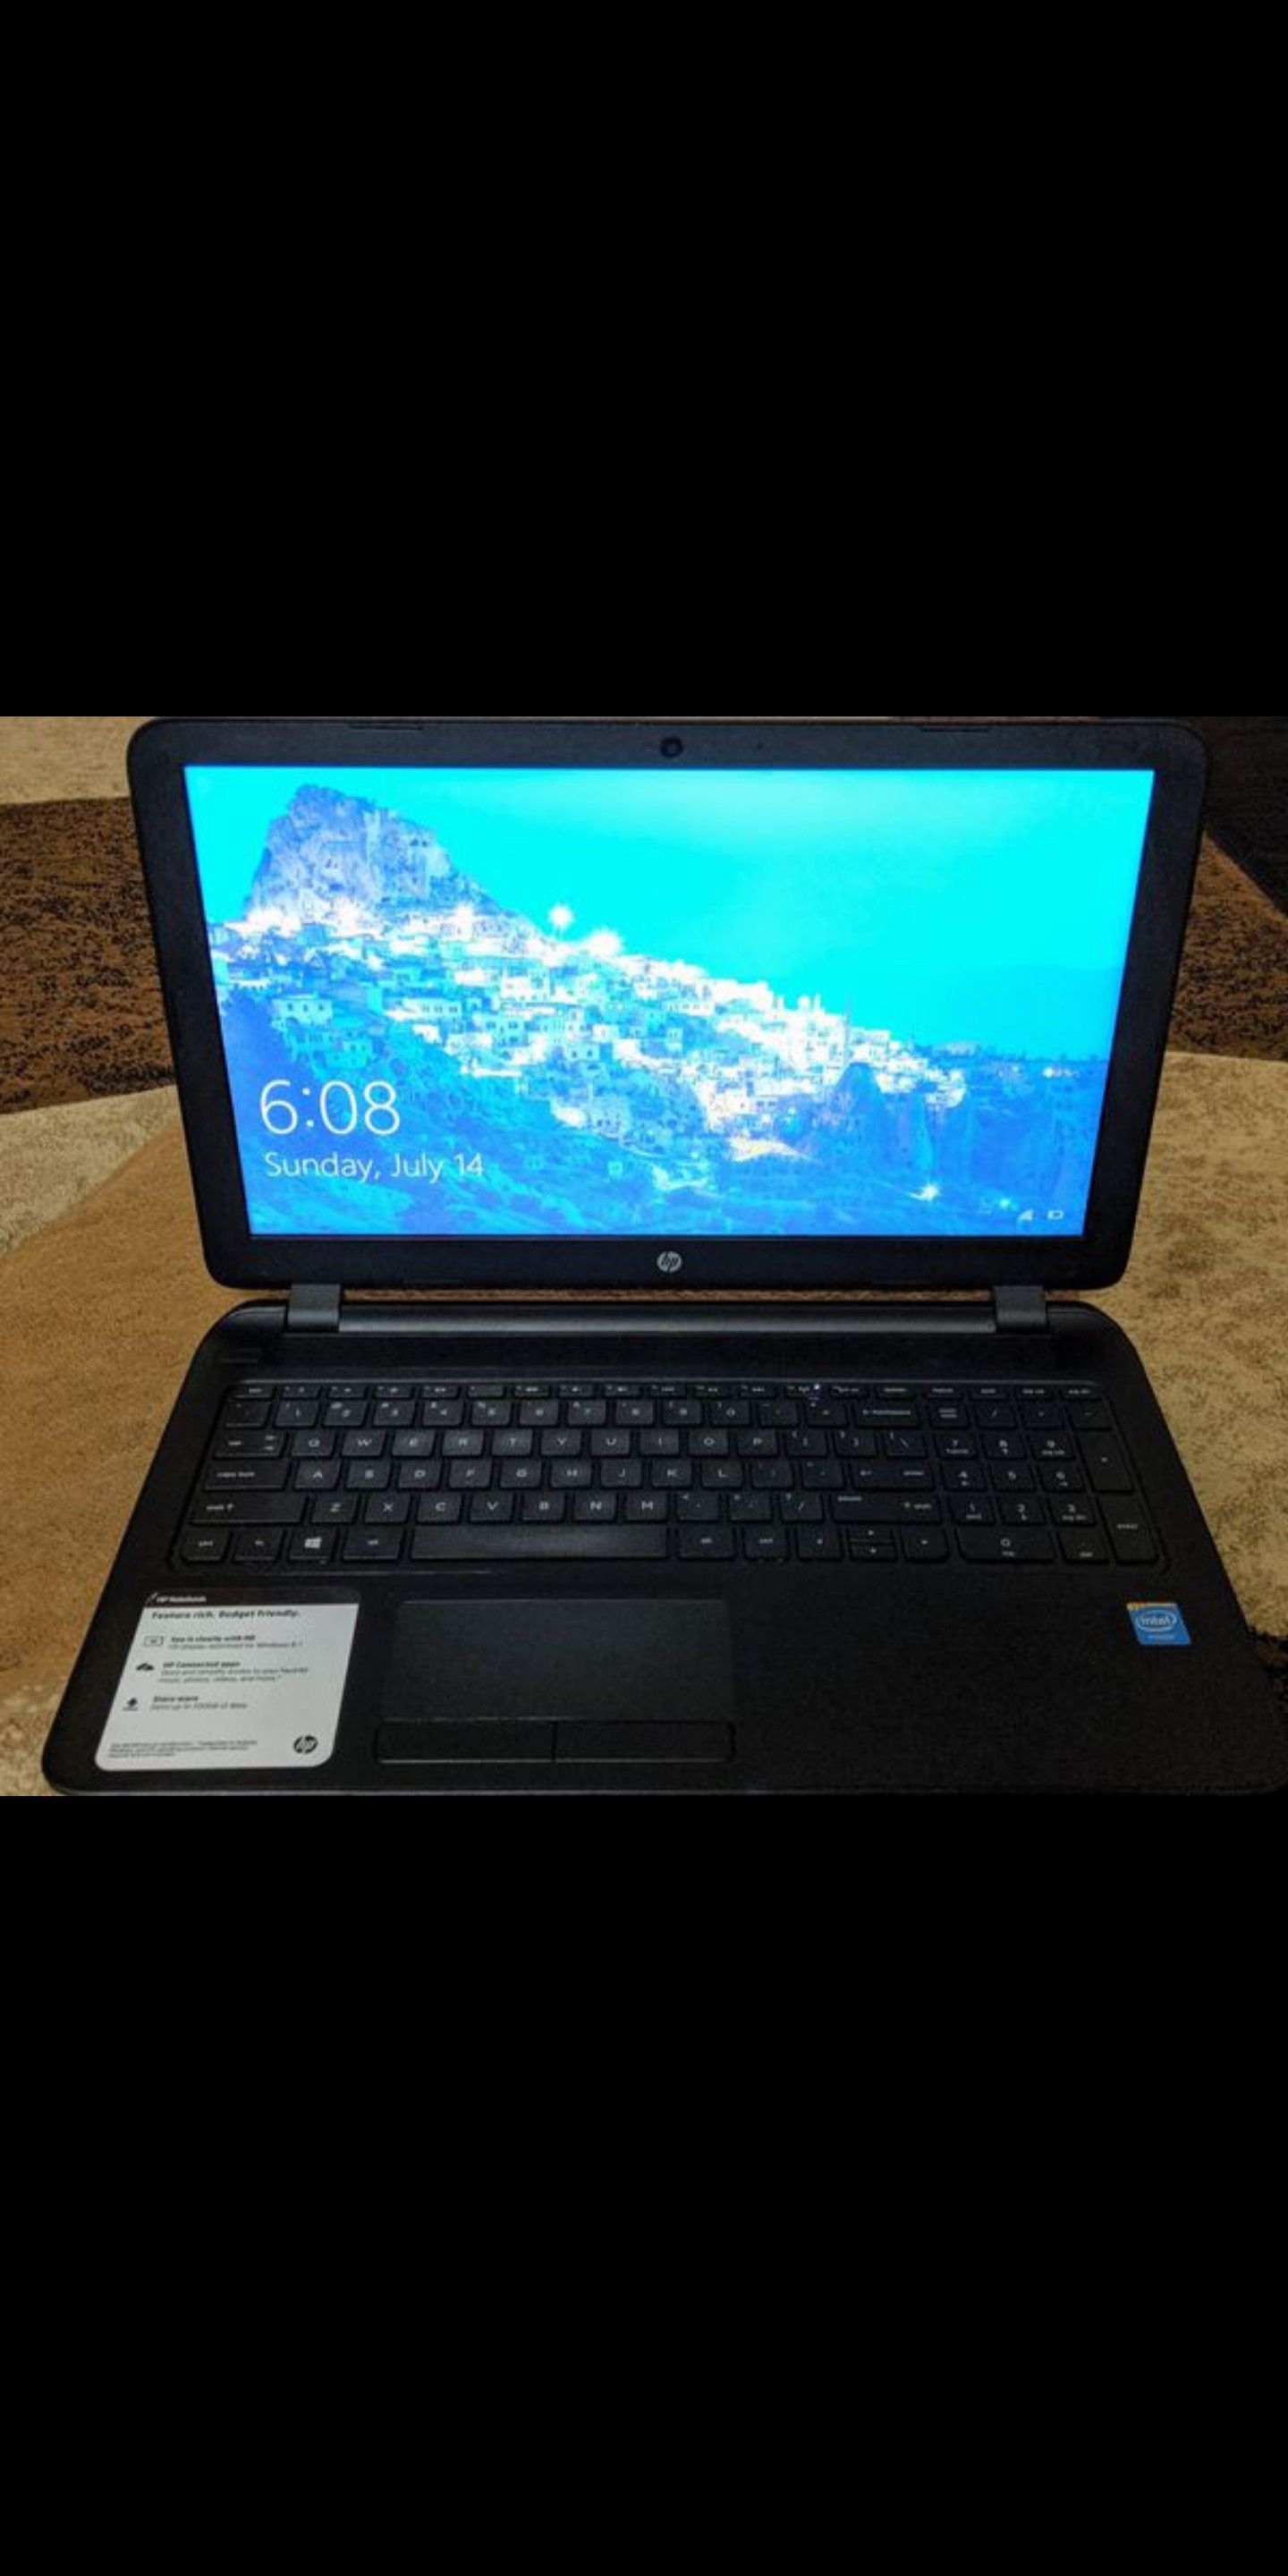 HP Notebook Windows 8.1 with Bing